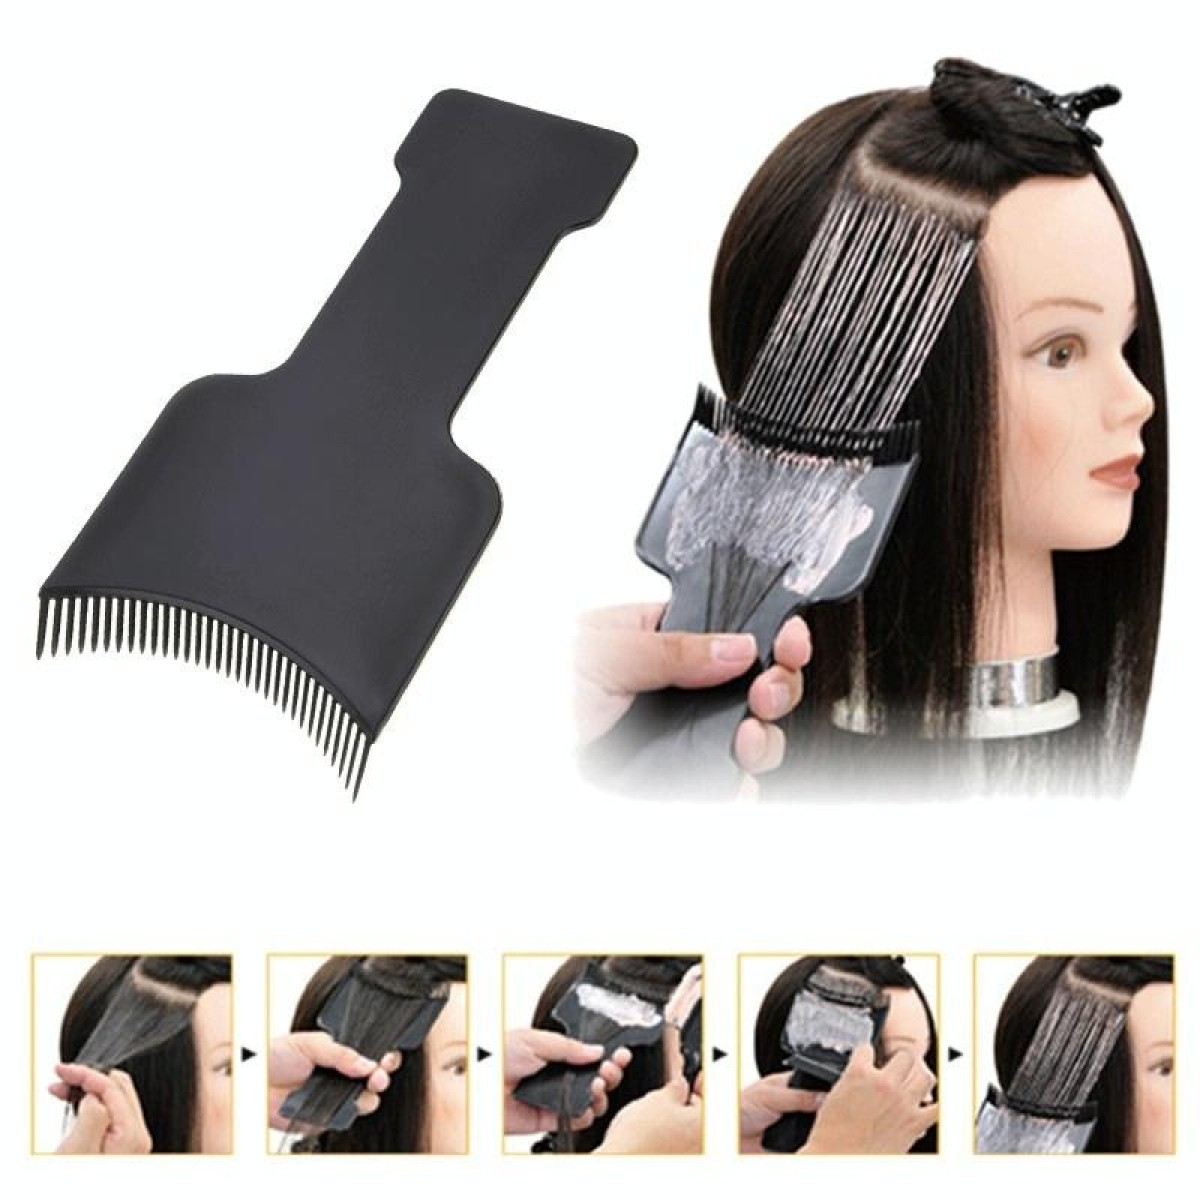 Fashion Professional Hairdressing Hair Applicator Brush Dispensing Salon Hair Coloring Dyeing Pick Color Board, Size:M